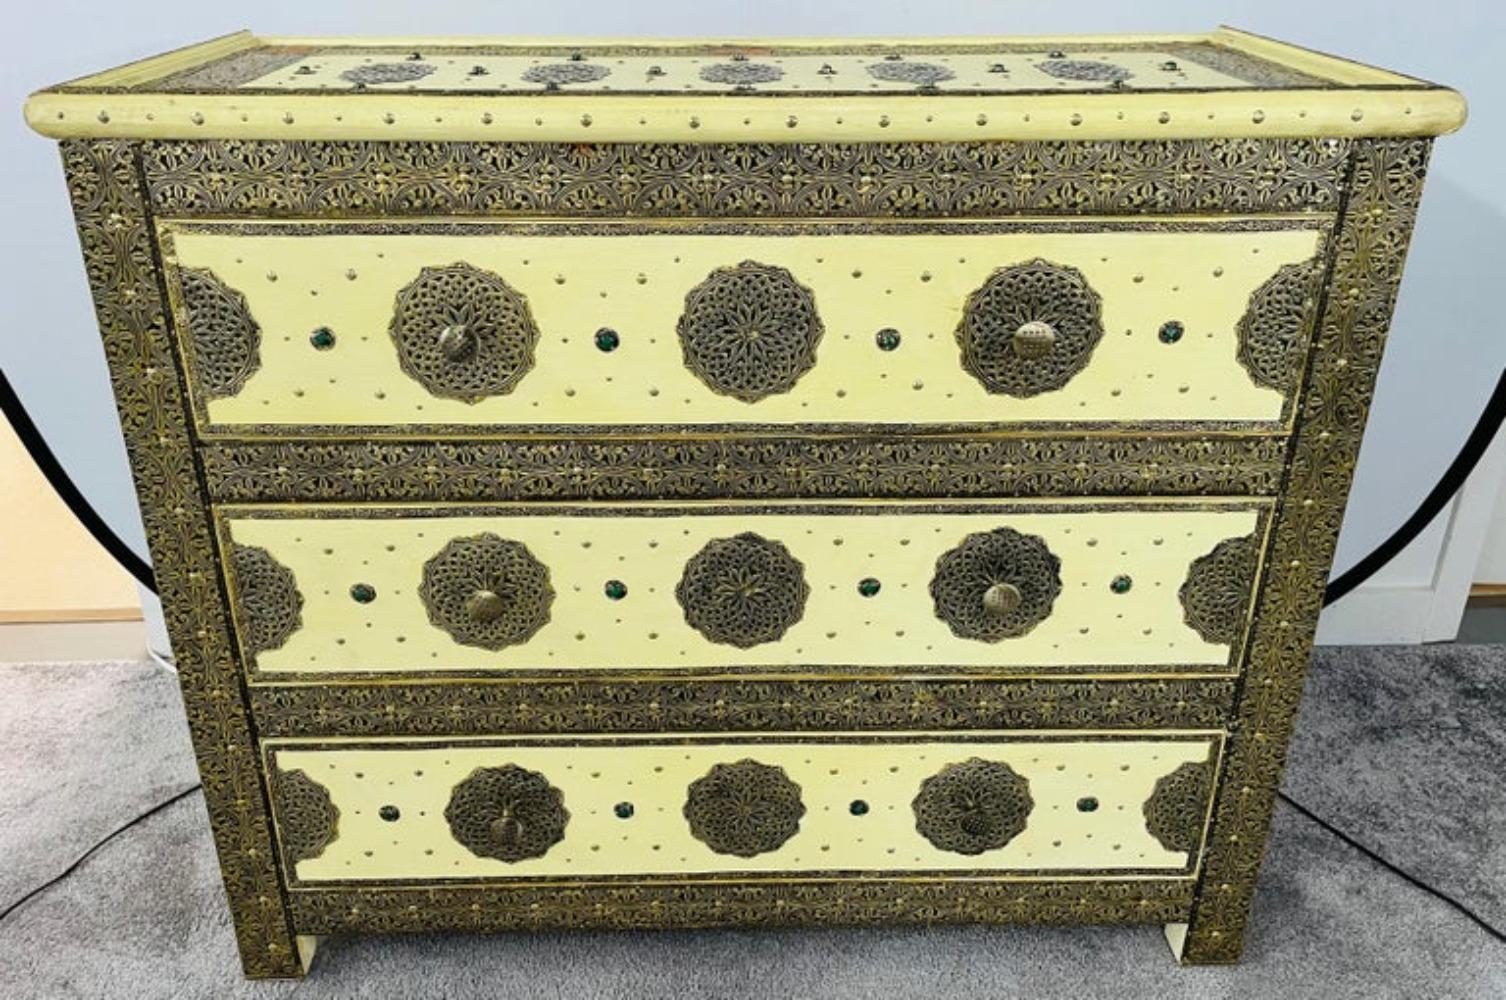 An opulent Hollywood regency style commode, chest or nightstand. This exceptional chest depicts and compliments the Hollywood Regency era at its finest. The commode features amazing intricate latticework on silver-toned metal and brass and ornate